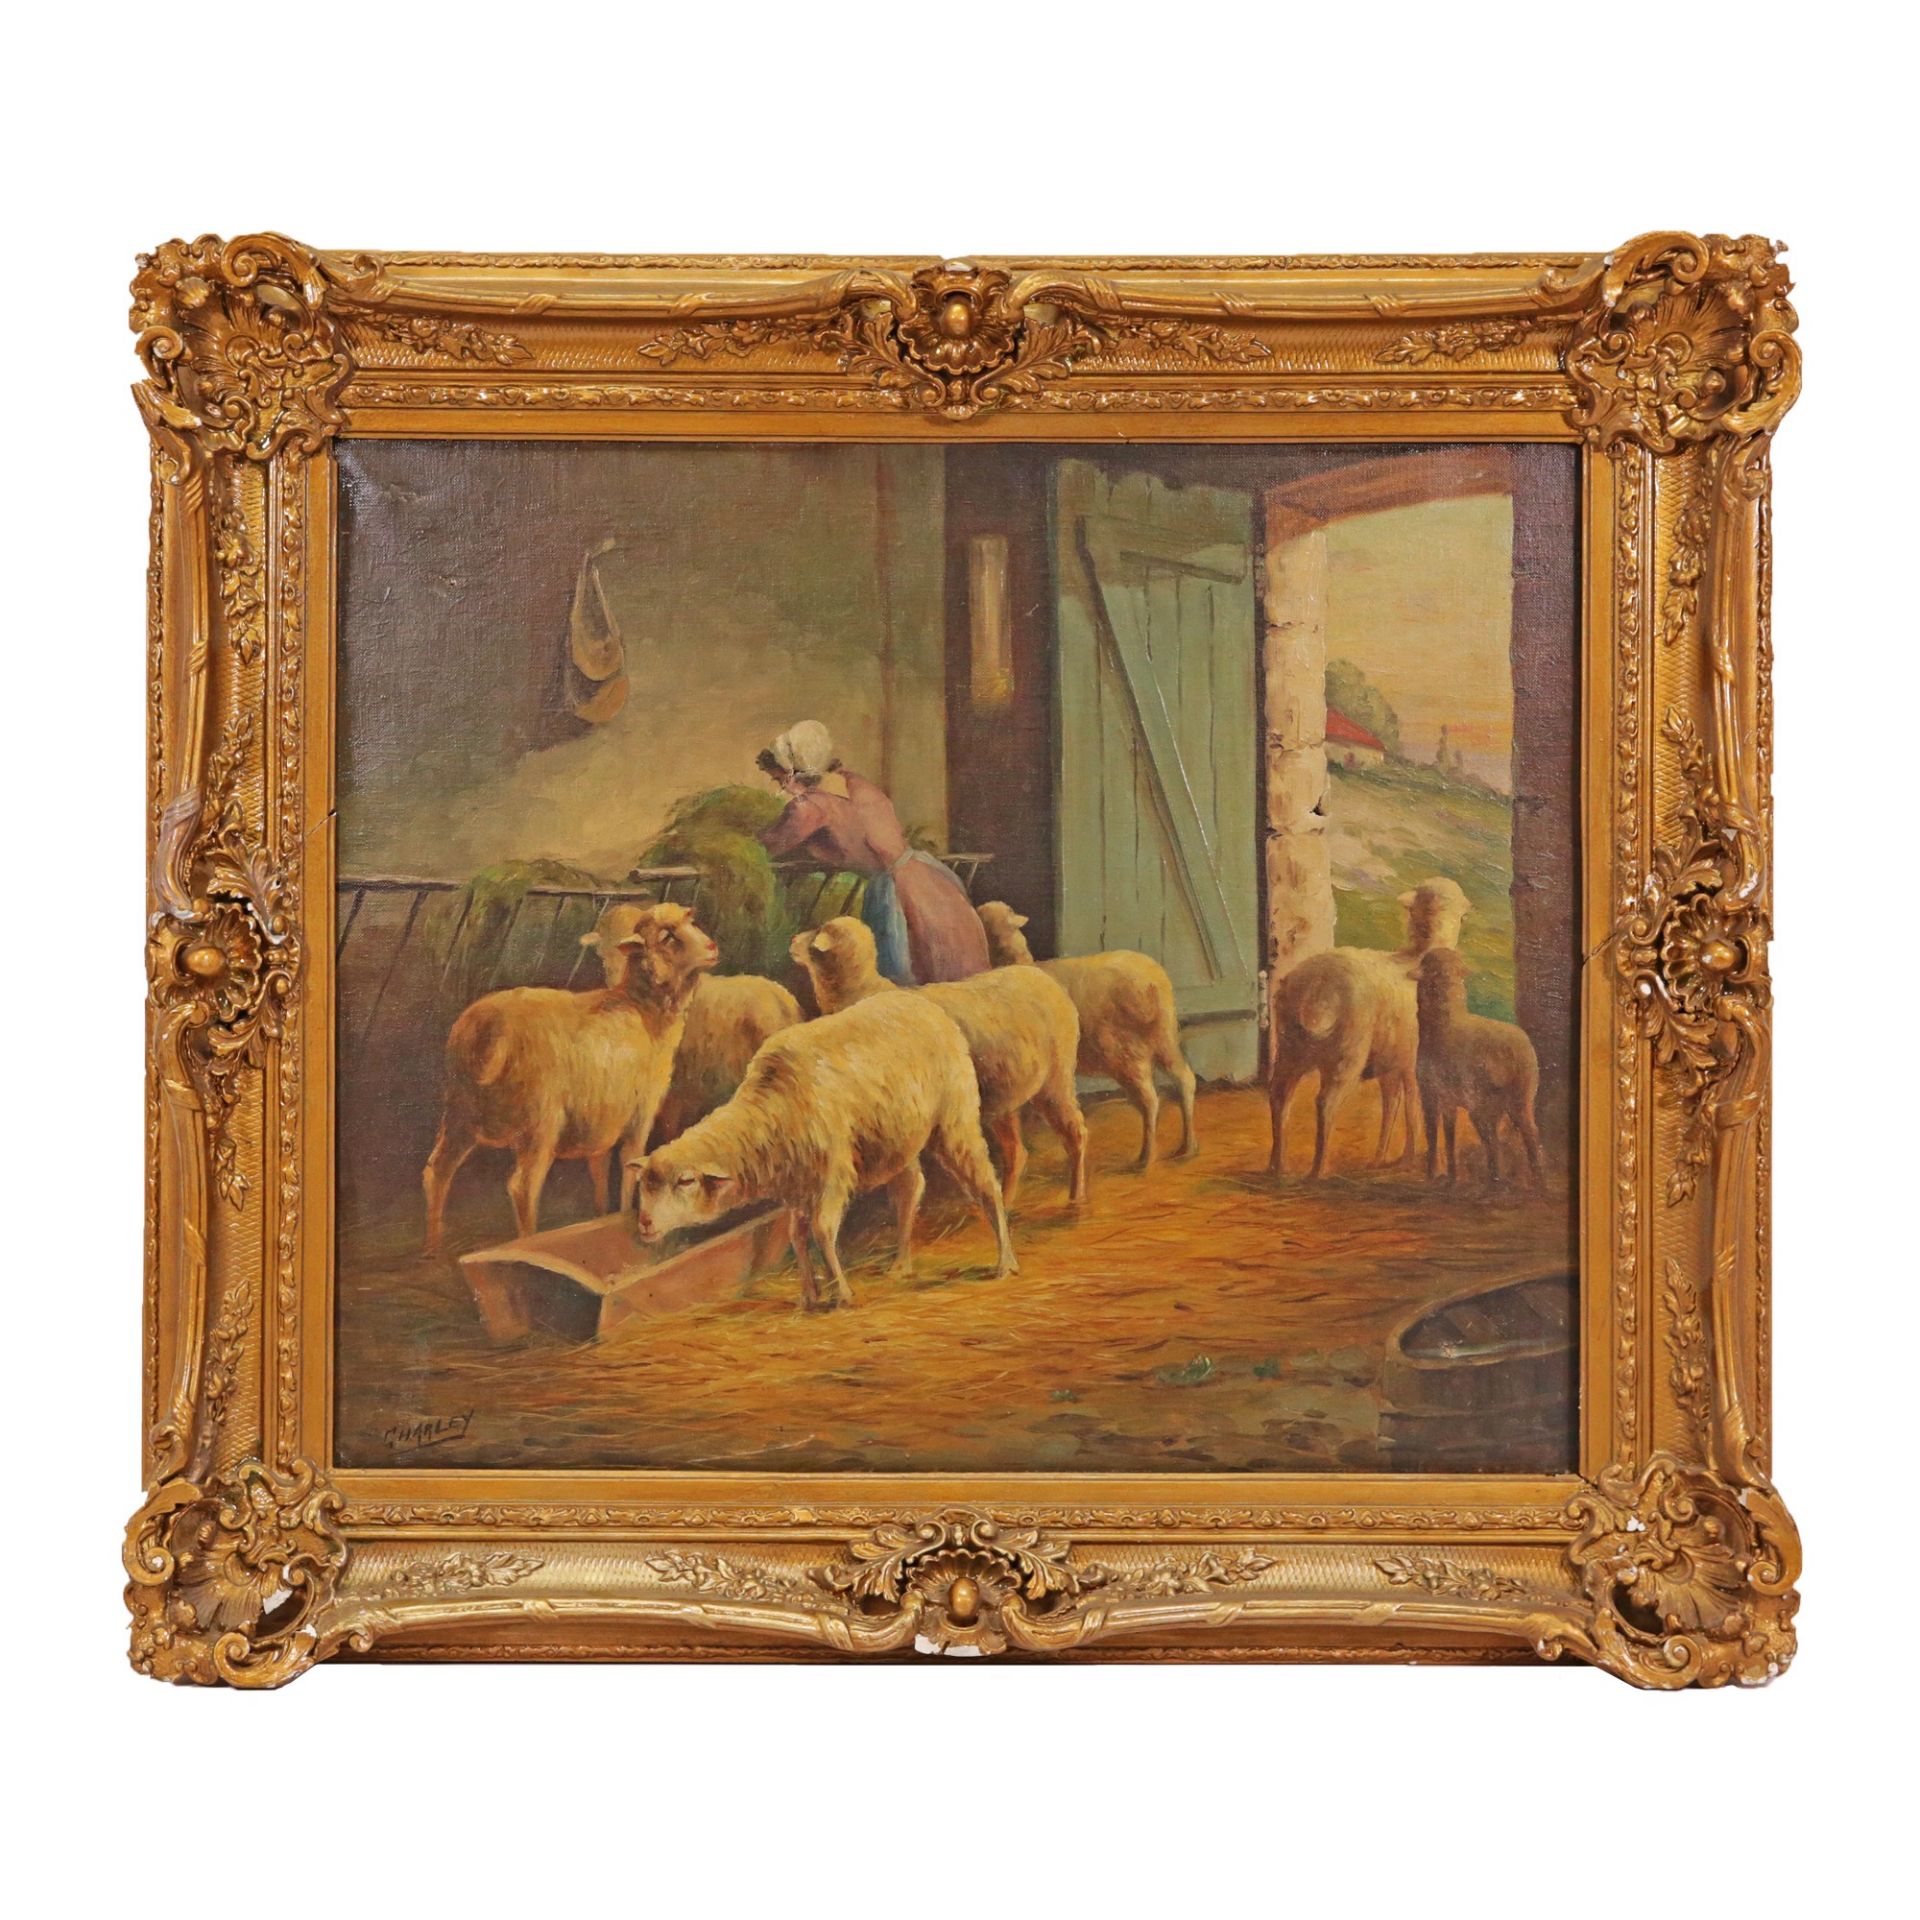 Noel CHARLEY (act.c.1900) "Sheep and shepherdess in the stable", oil on canvas.